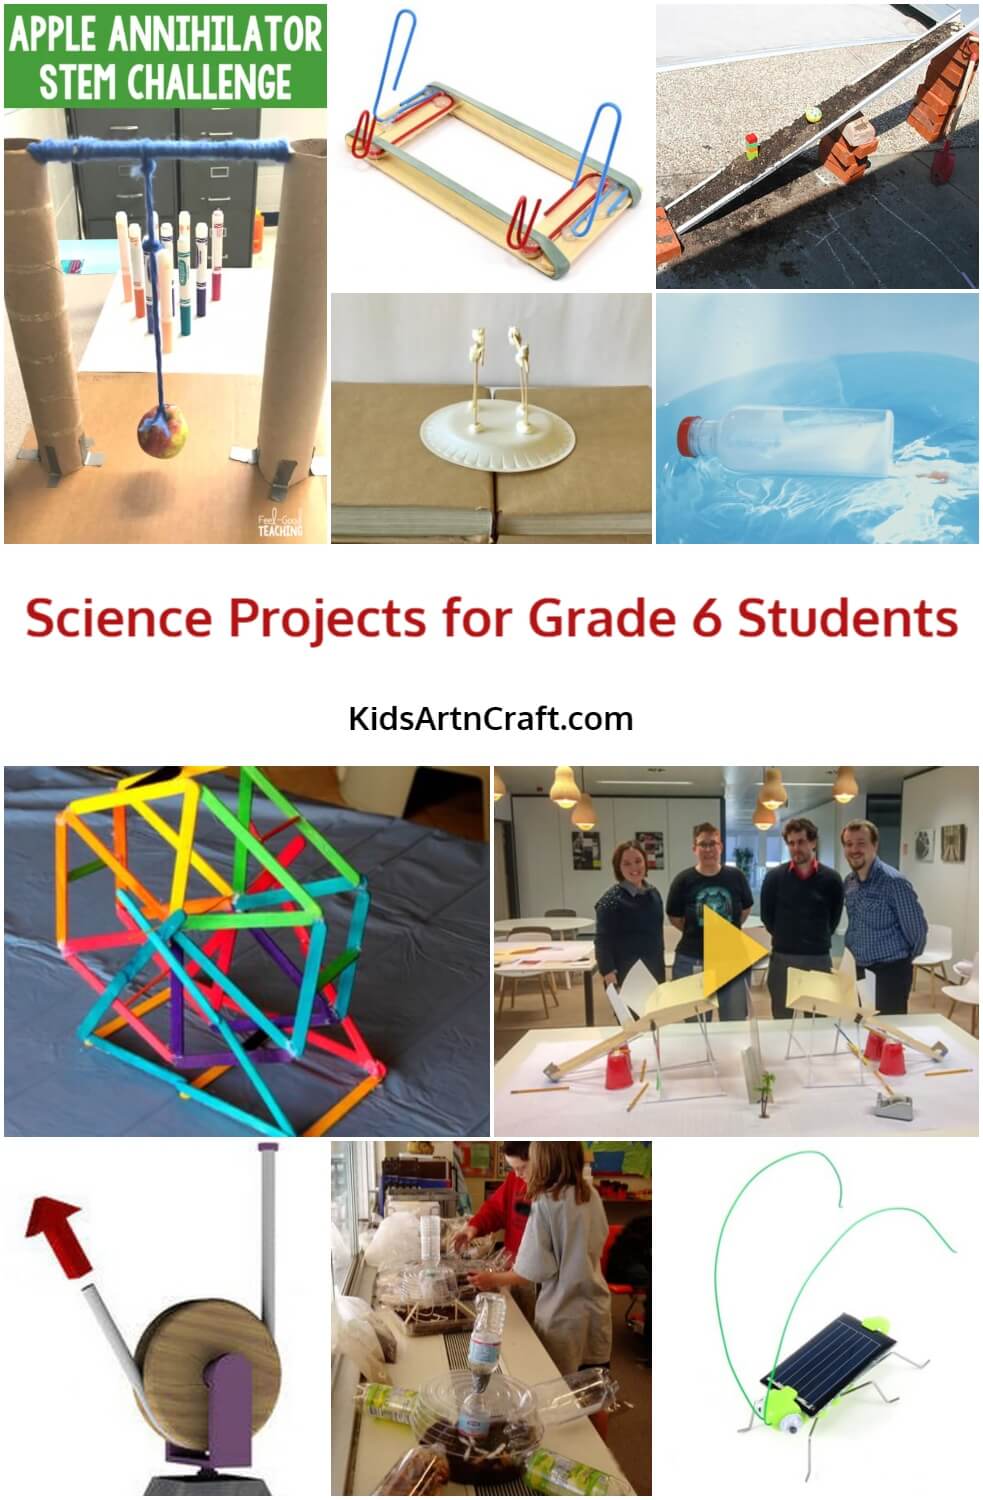 Science Projects for Grade 6 Students